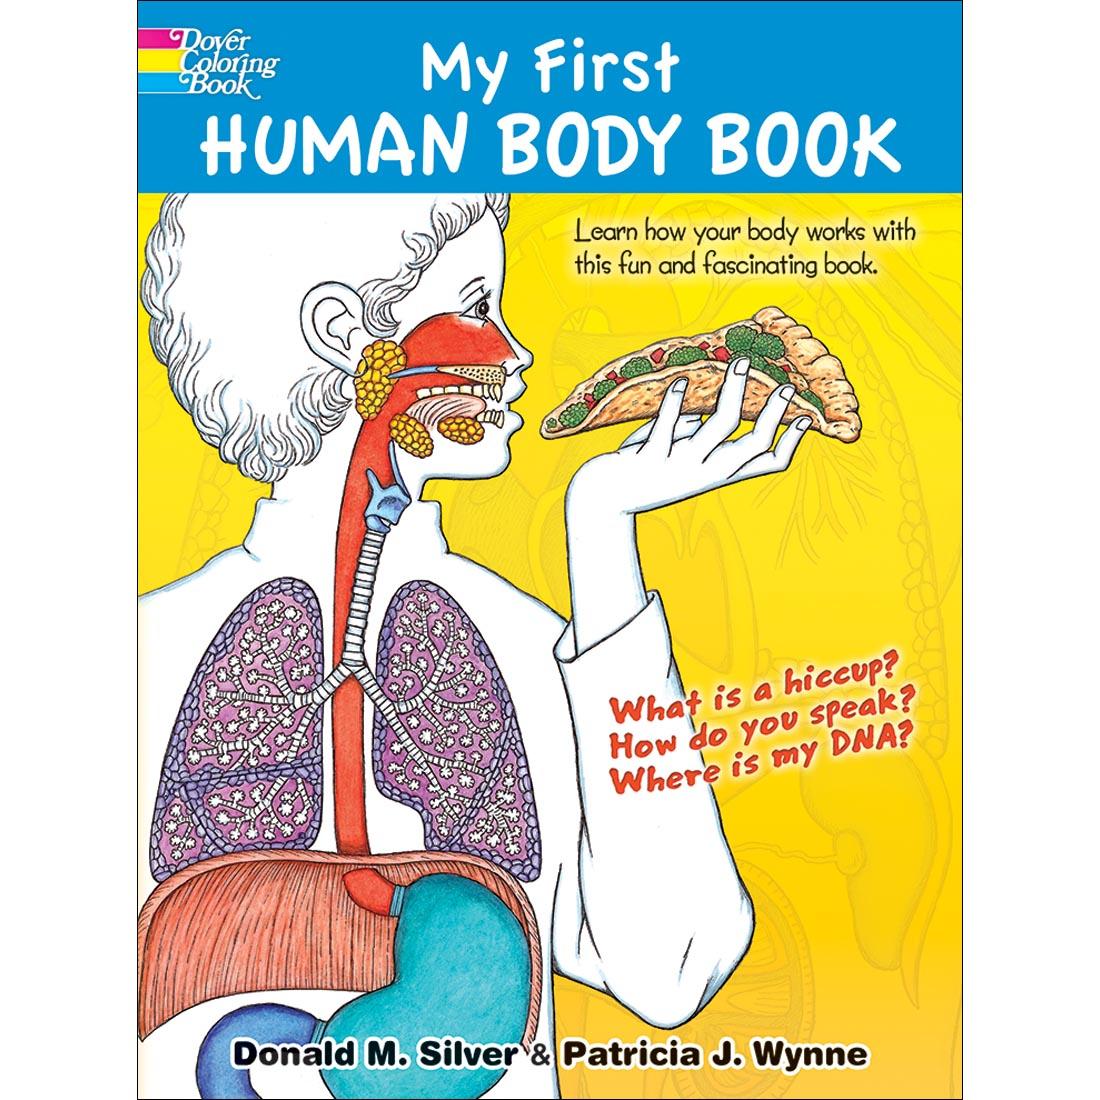 My First Human Body Book Coloring Book by Dover